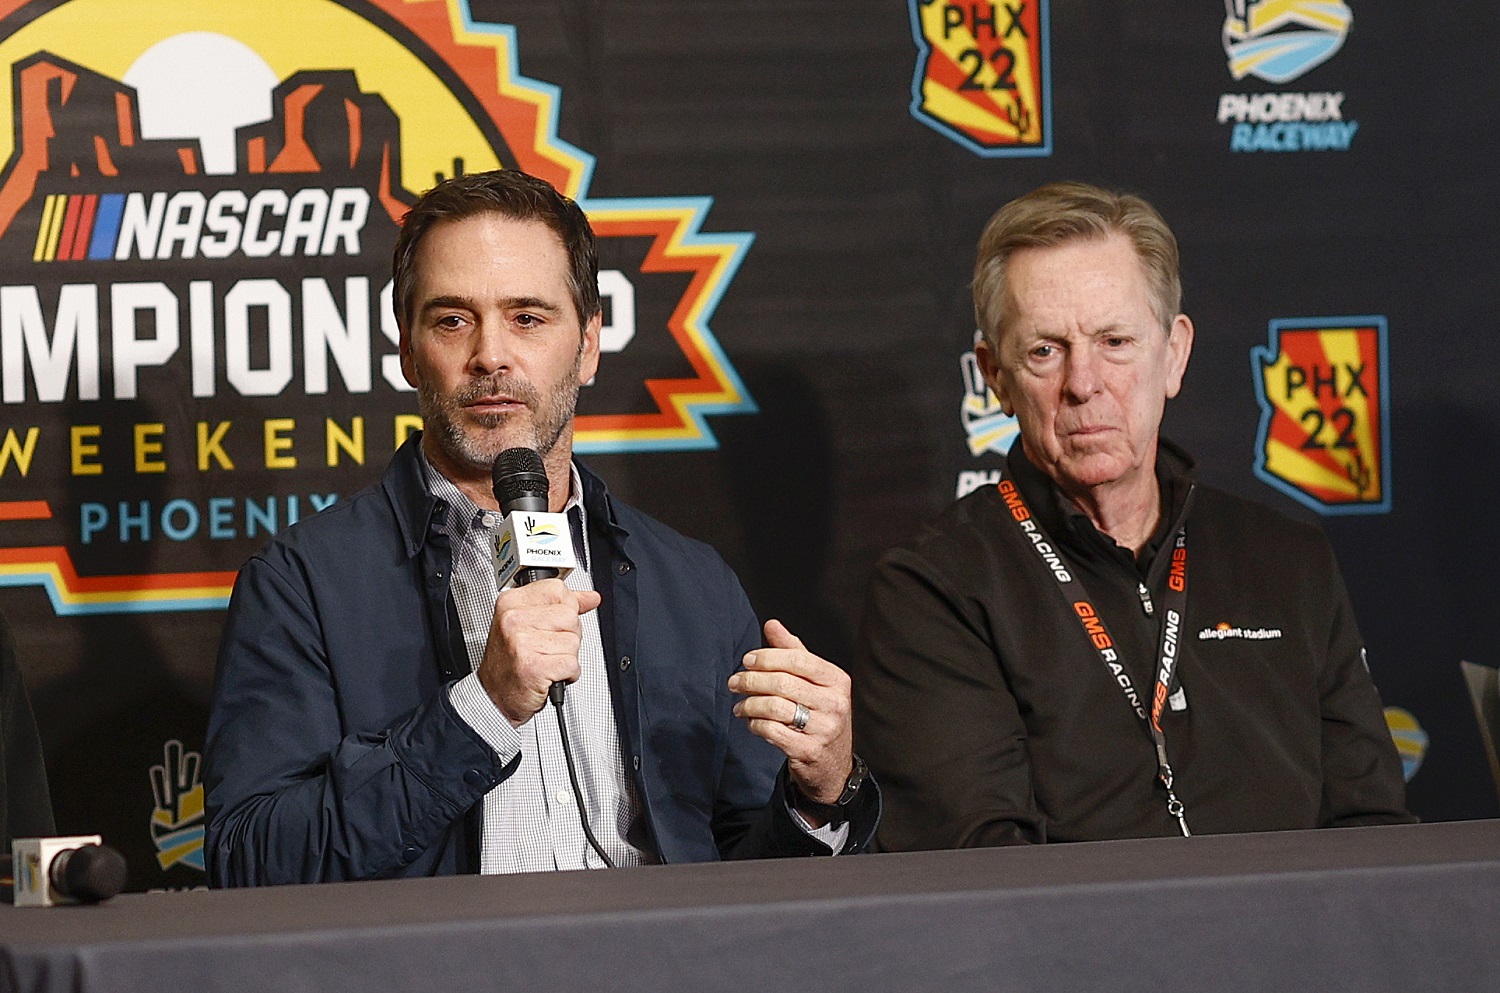 Former NASCAR driver Jimmie Johnson and Petty GMS co-owner Maury Gallagher are teaming up at Petty GMS in 2023. | Chris Graythen/Getty Images